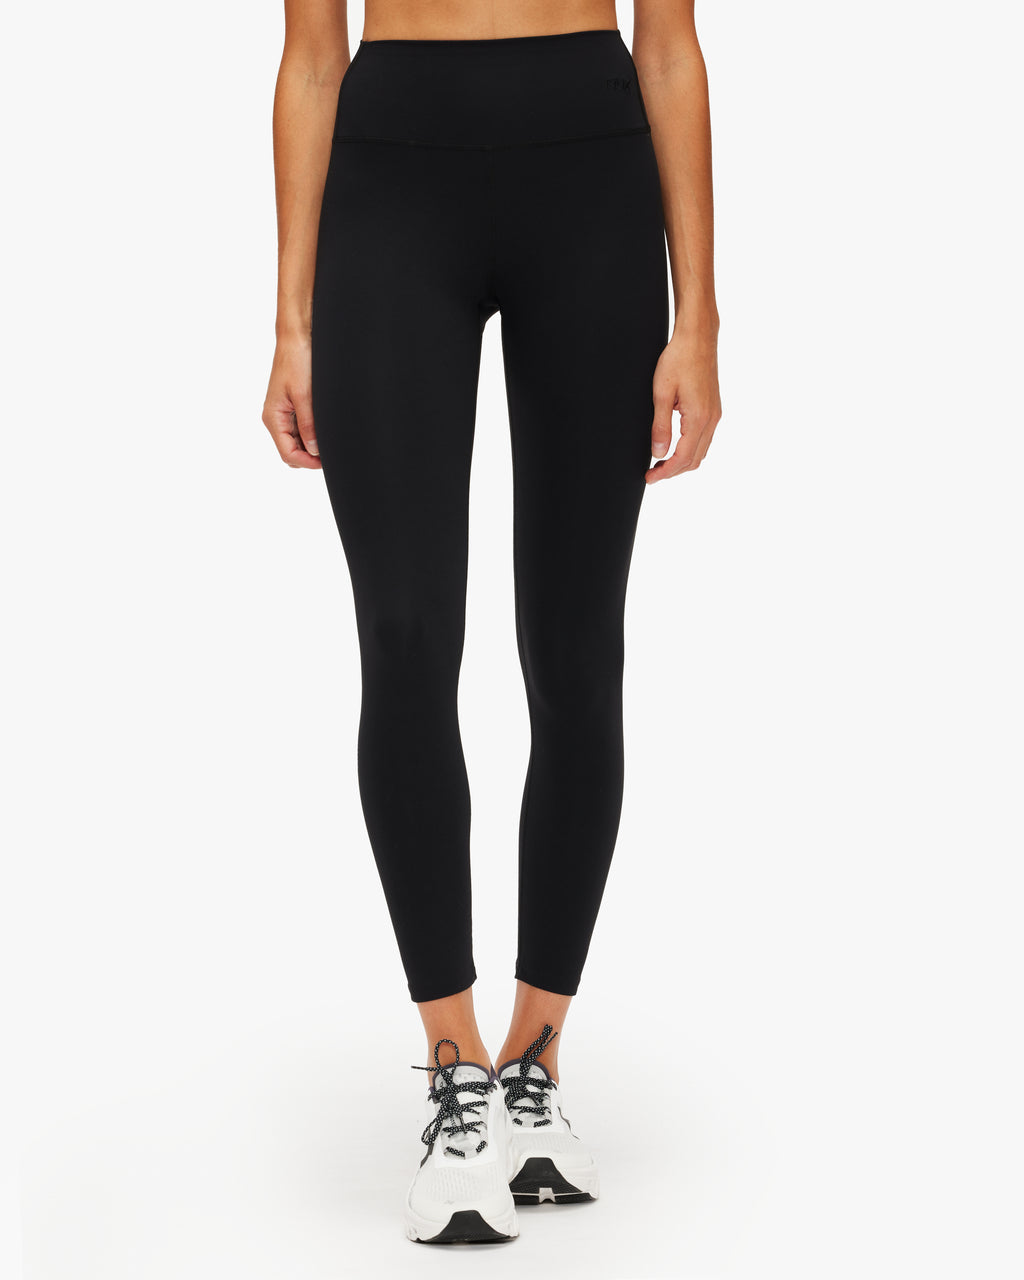 NUX One By One Legging - Black – SculptHouse